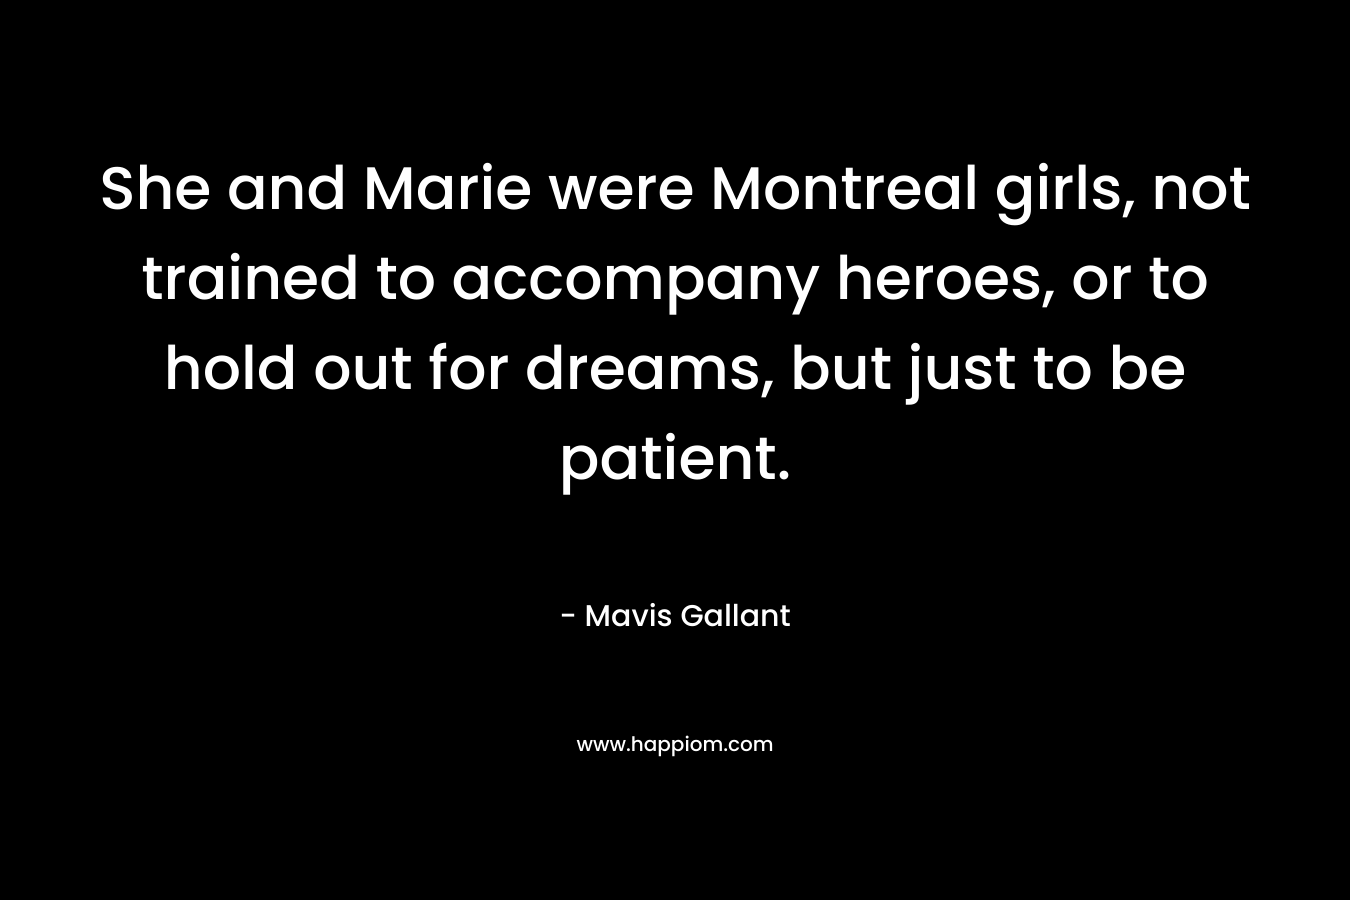 She and Marie were Montreal girls, not trained to accompany heroes, or to hold out for dreams, but just to be patient. – Mavis Gallant